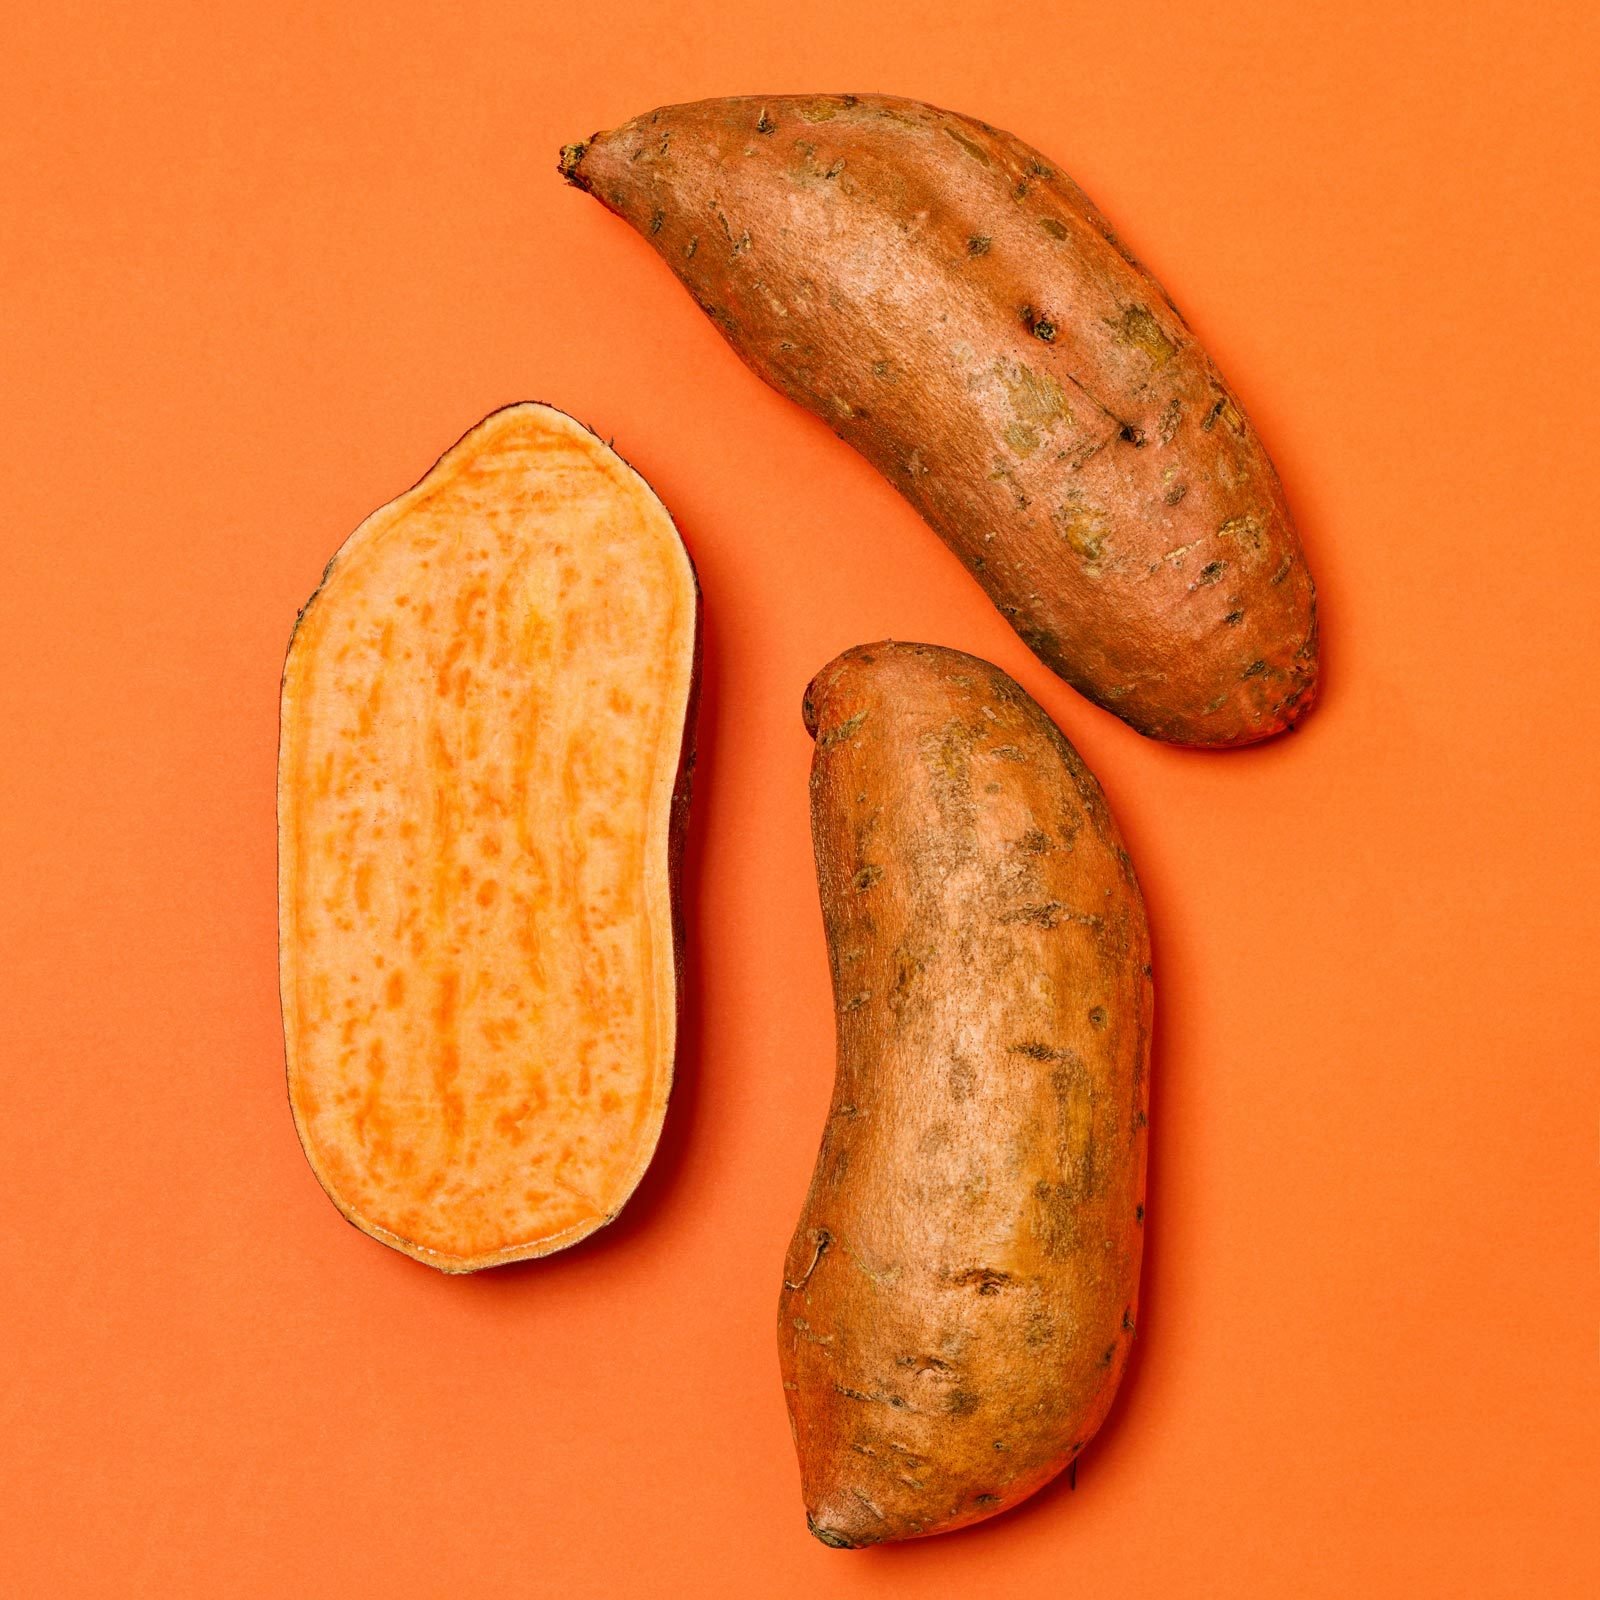 Jamaican yam - simply nutritious and delicious!, Health